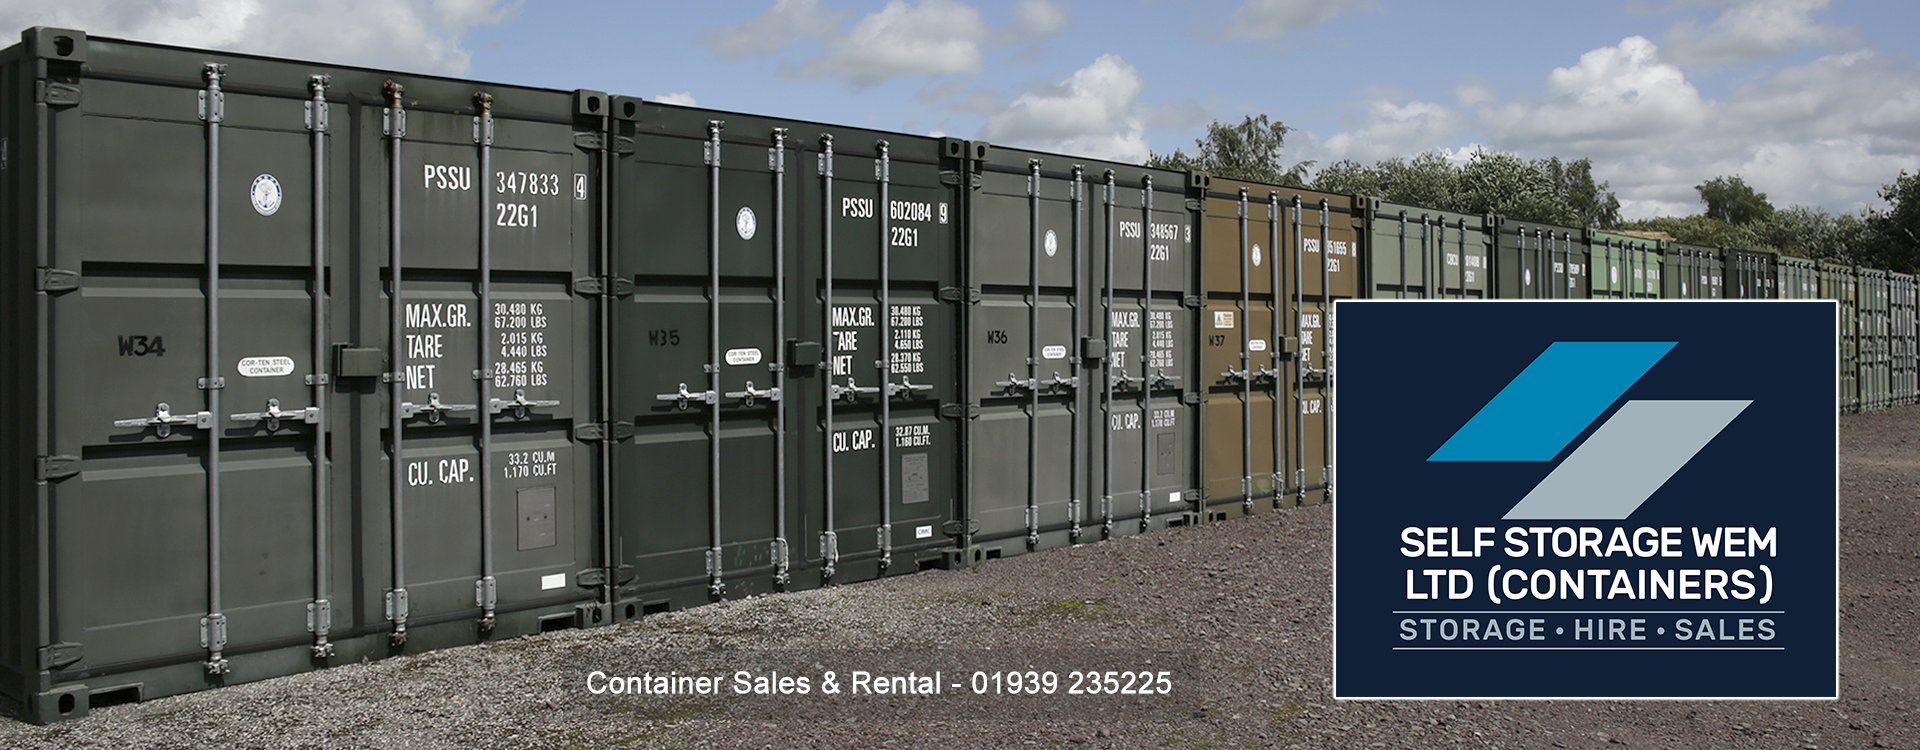 Contact Self Storage Wem Ltd (Containers)